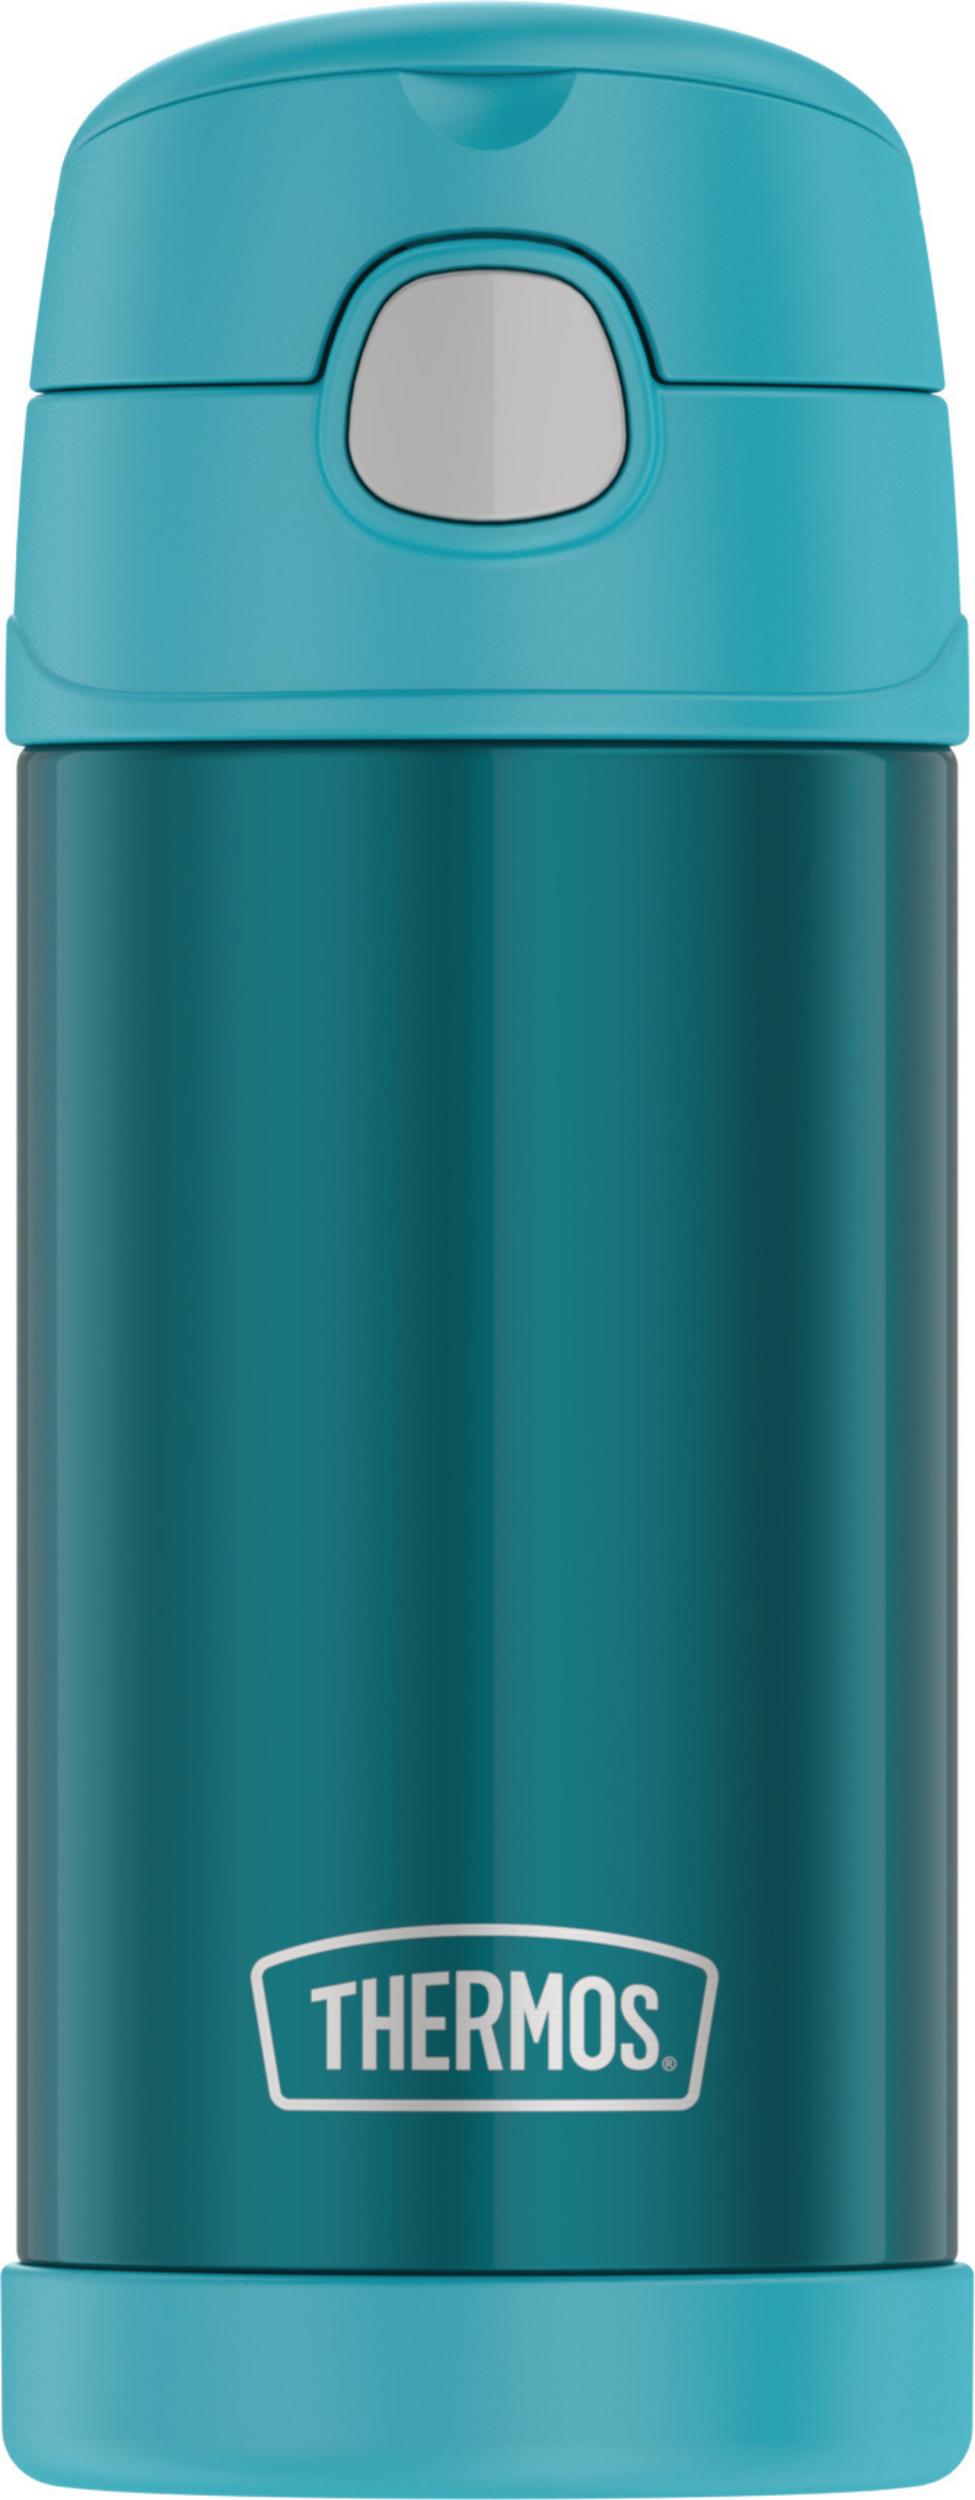 Bouteille Thermos FUNtainer, Turquoise, 355ml    - Thermos - Bouteille d'eau - 